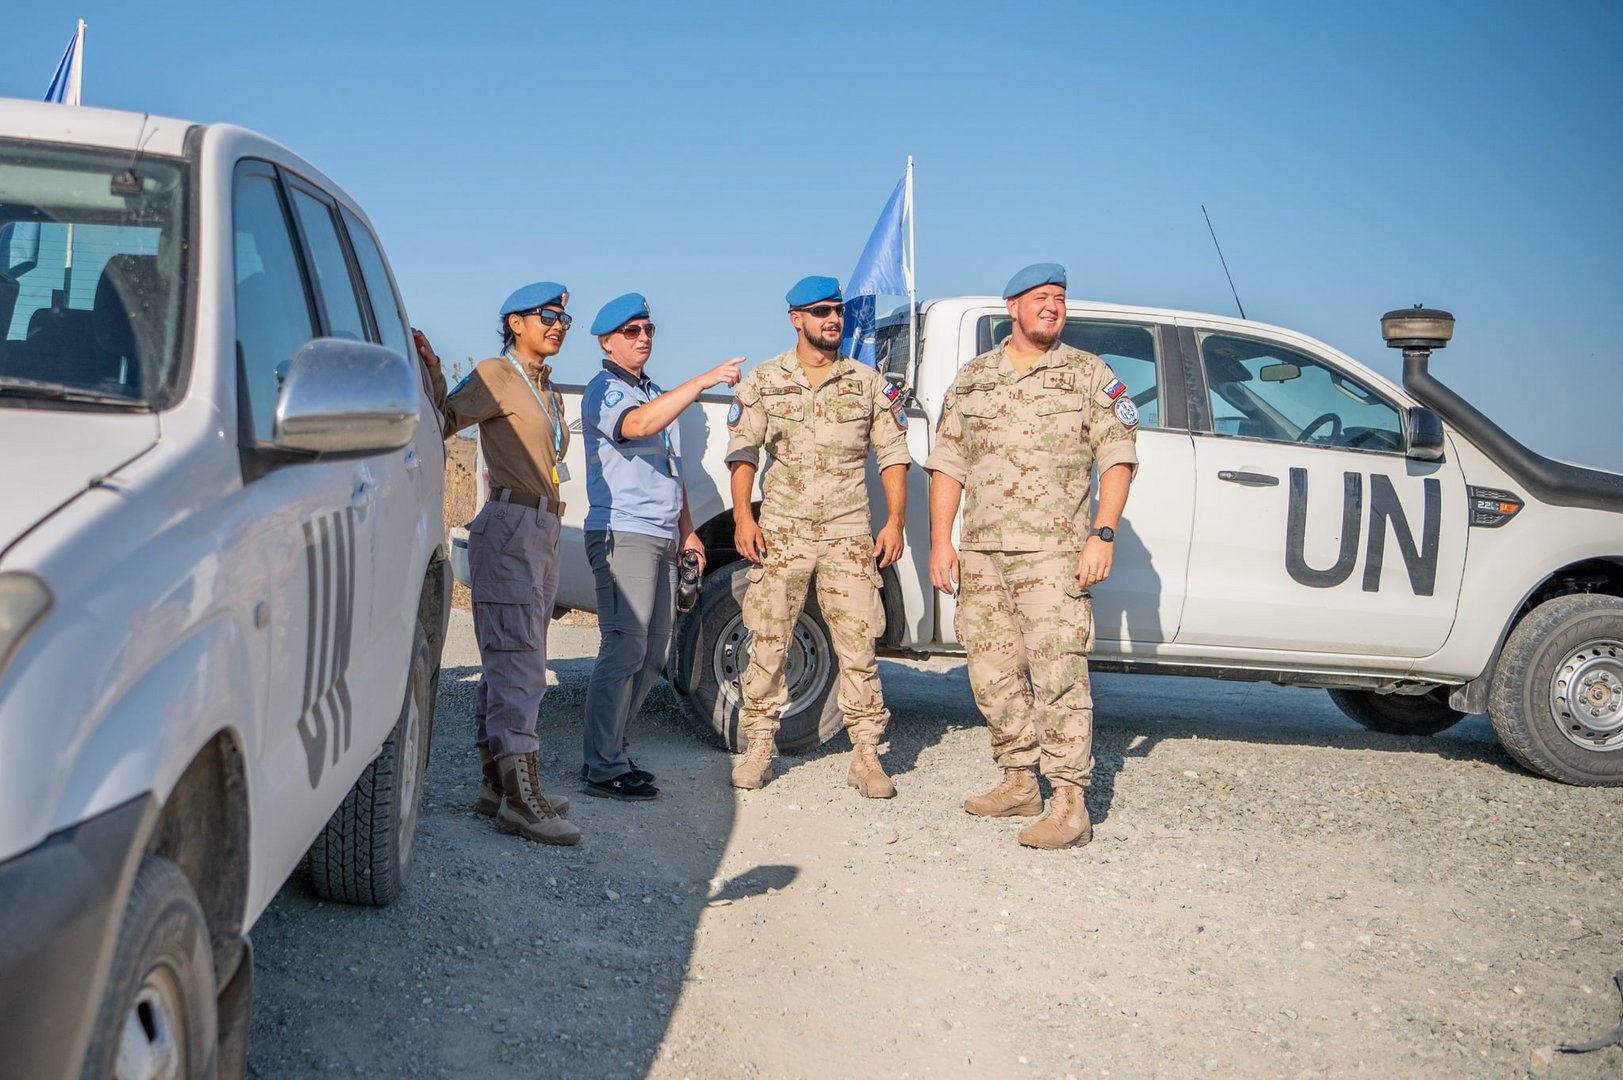 image The Pyla crisis, Unficyp and the UN